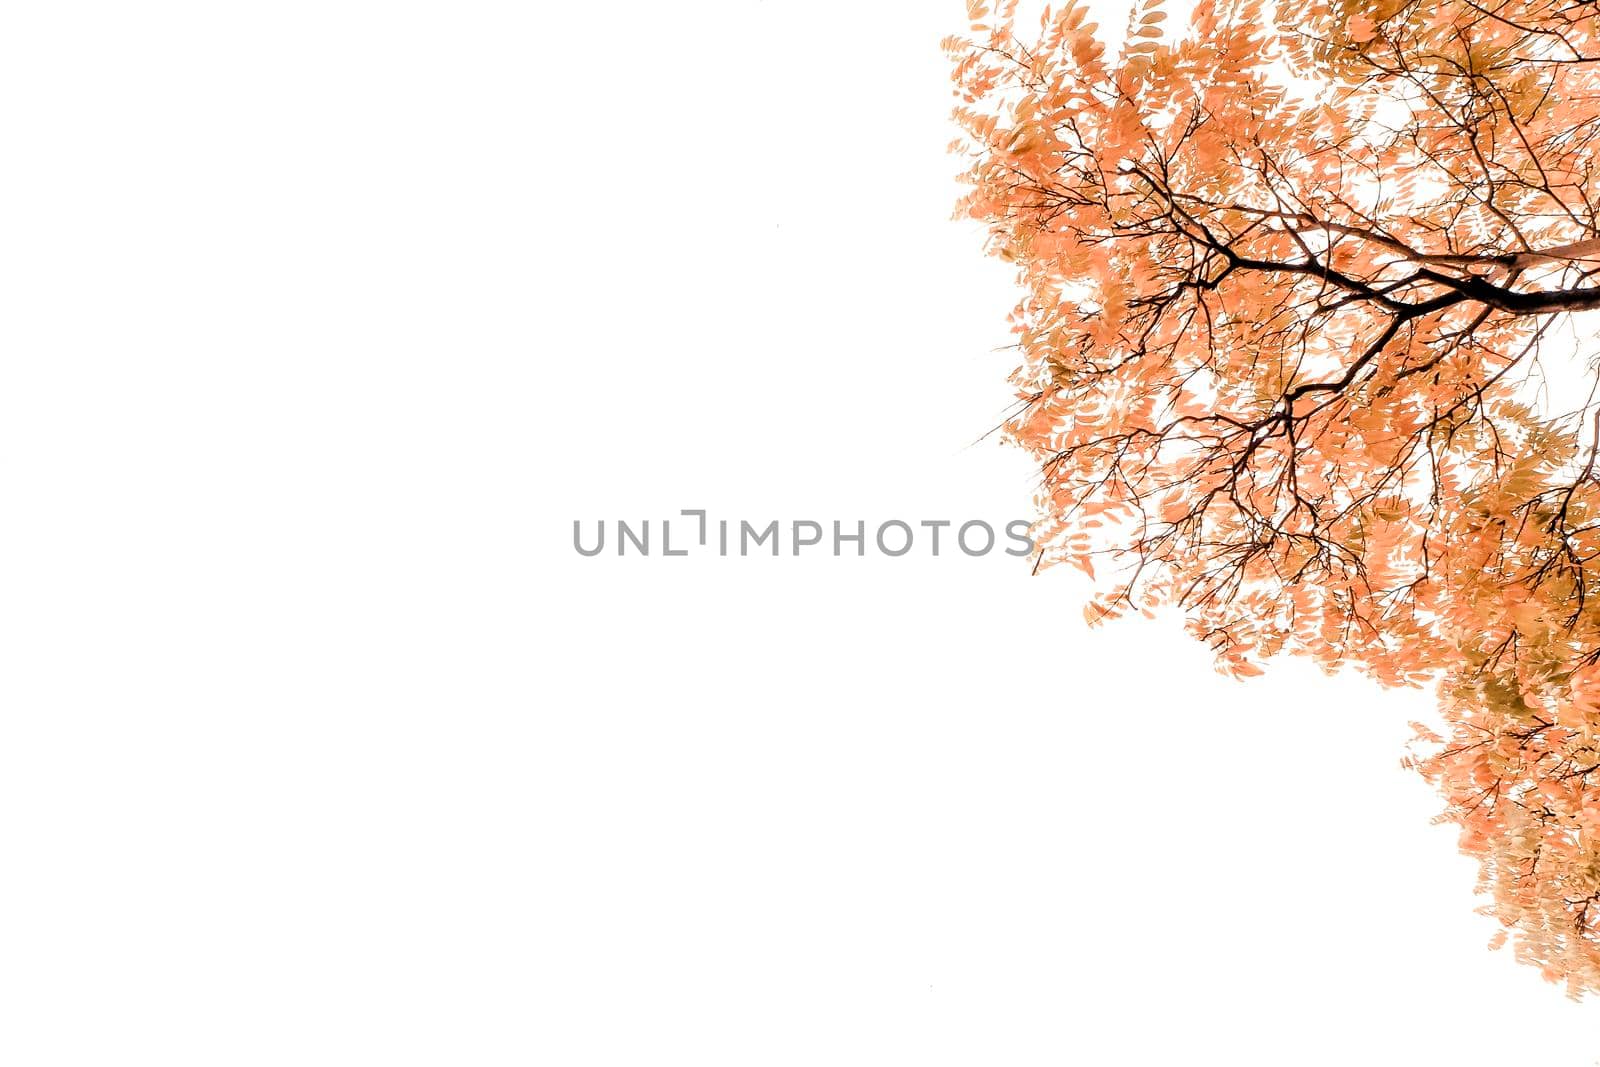 Autumn background with golden maple and oak leaves.  background with red, orange, brown and yellow falling autumn leaves by Petrichor